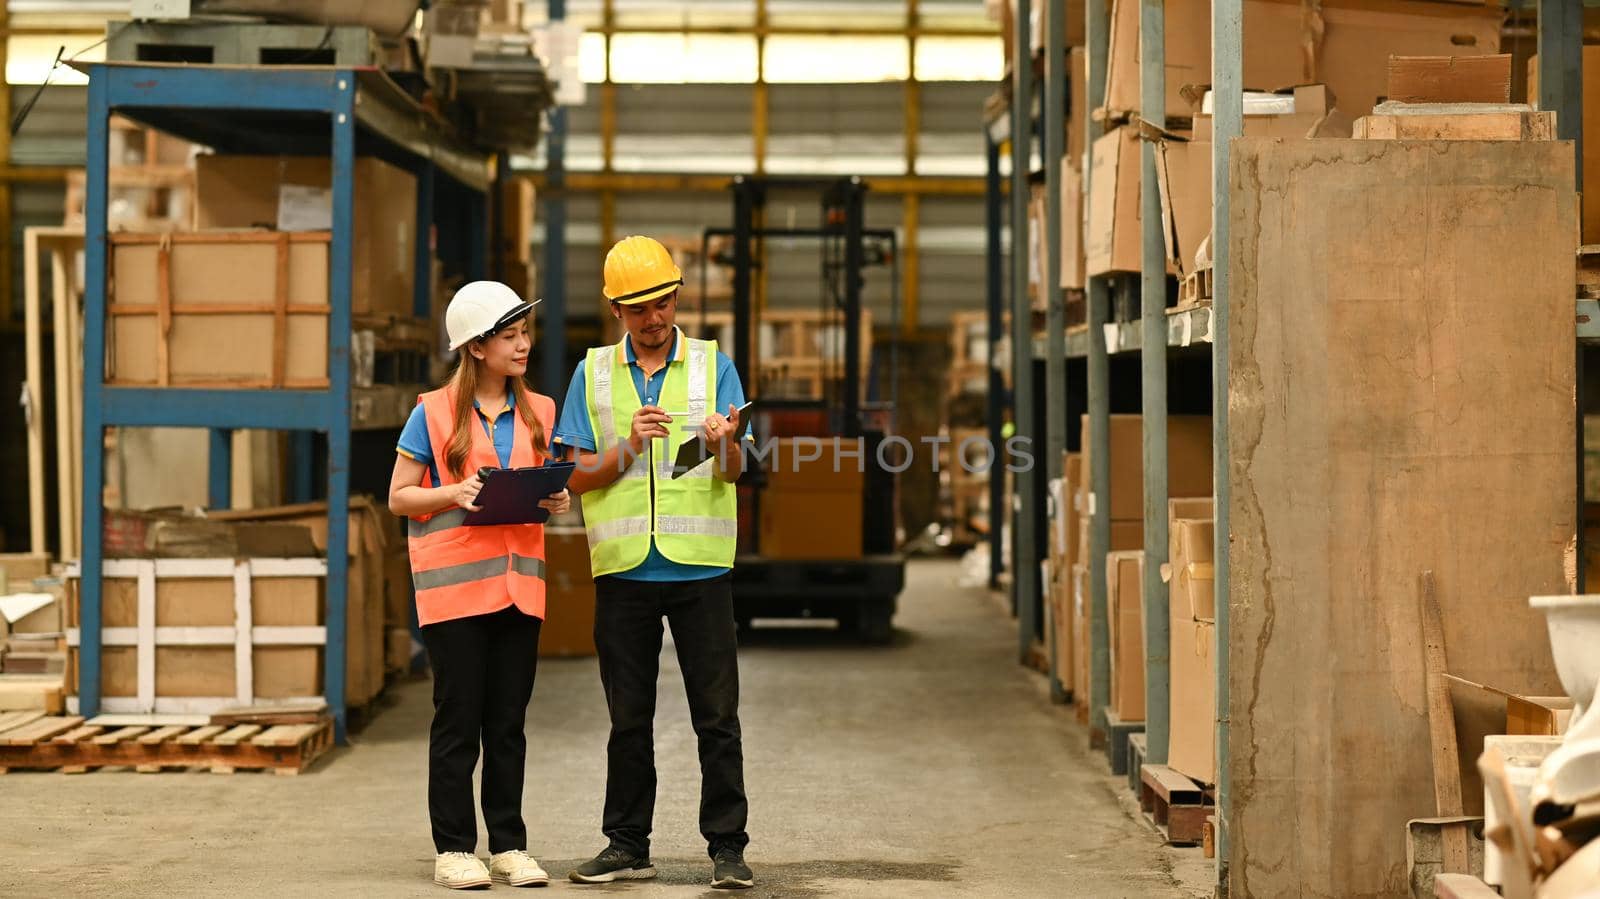 Full length of female managers and worker checking inventory in a warehouse with shelves full of cardboard boxes in the background.